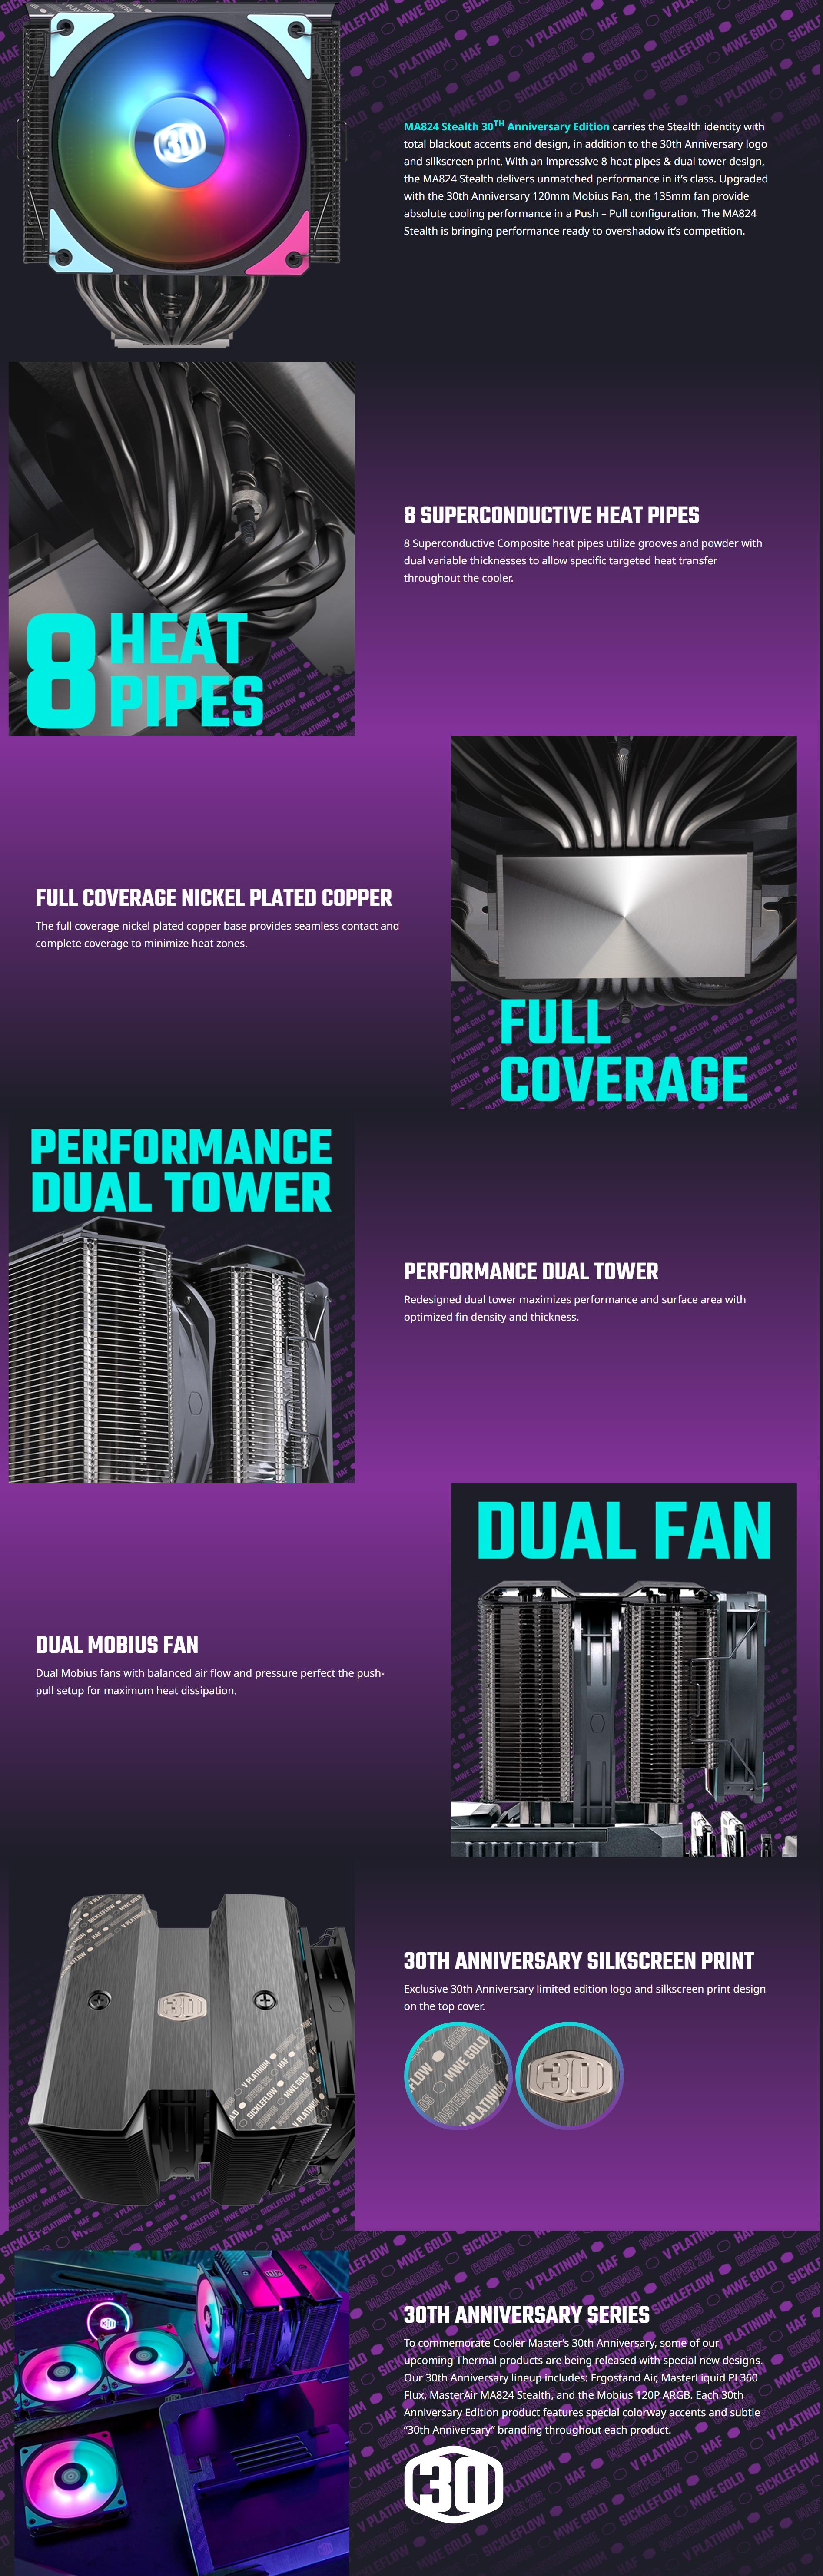 A large marketing image providing additional information about the product Cooler Master MasterAir MA824 Stealth CPU Cooler - Additional alt info not provided